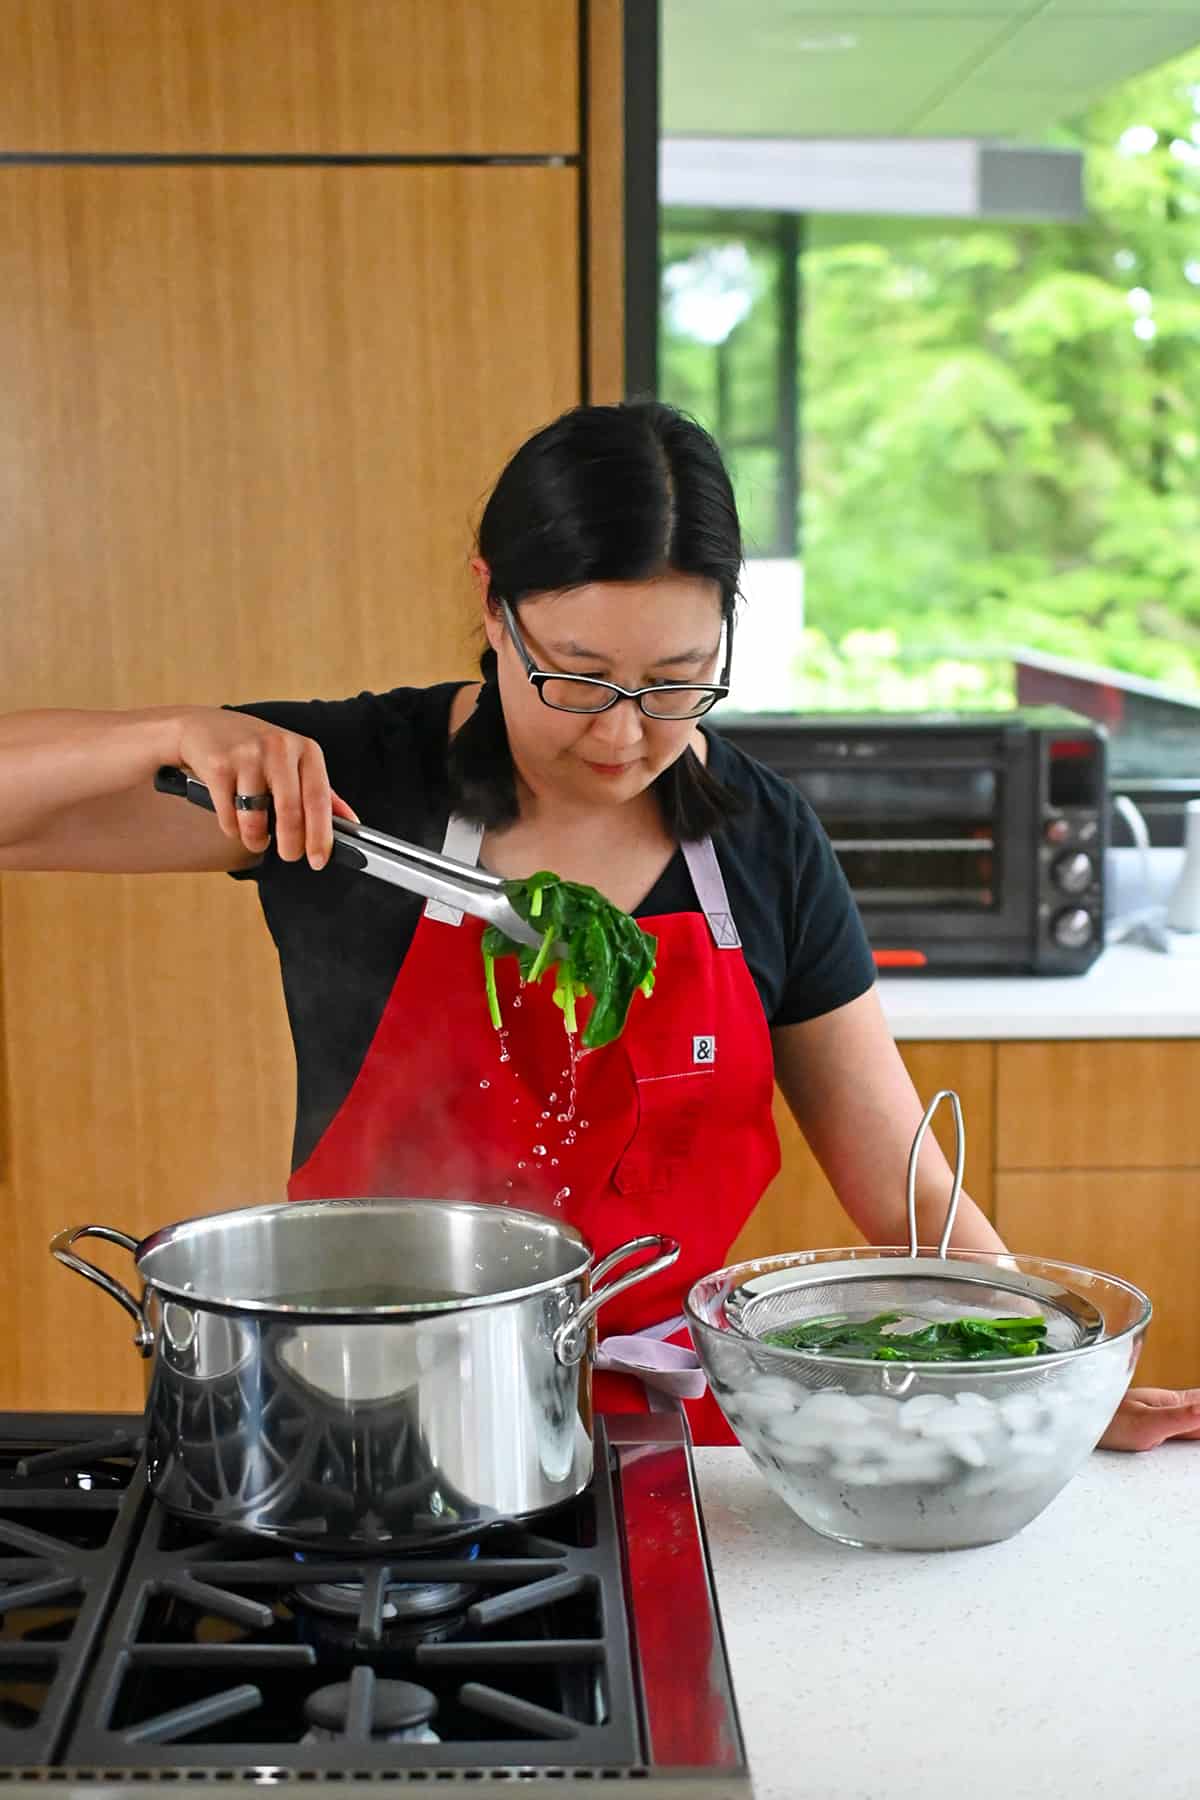 An Asian woman is transferring cooked spinach from a pot of boiling water to a glass bowl filled with ice water and a strainer.